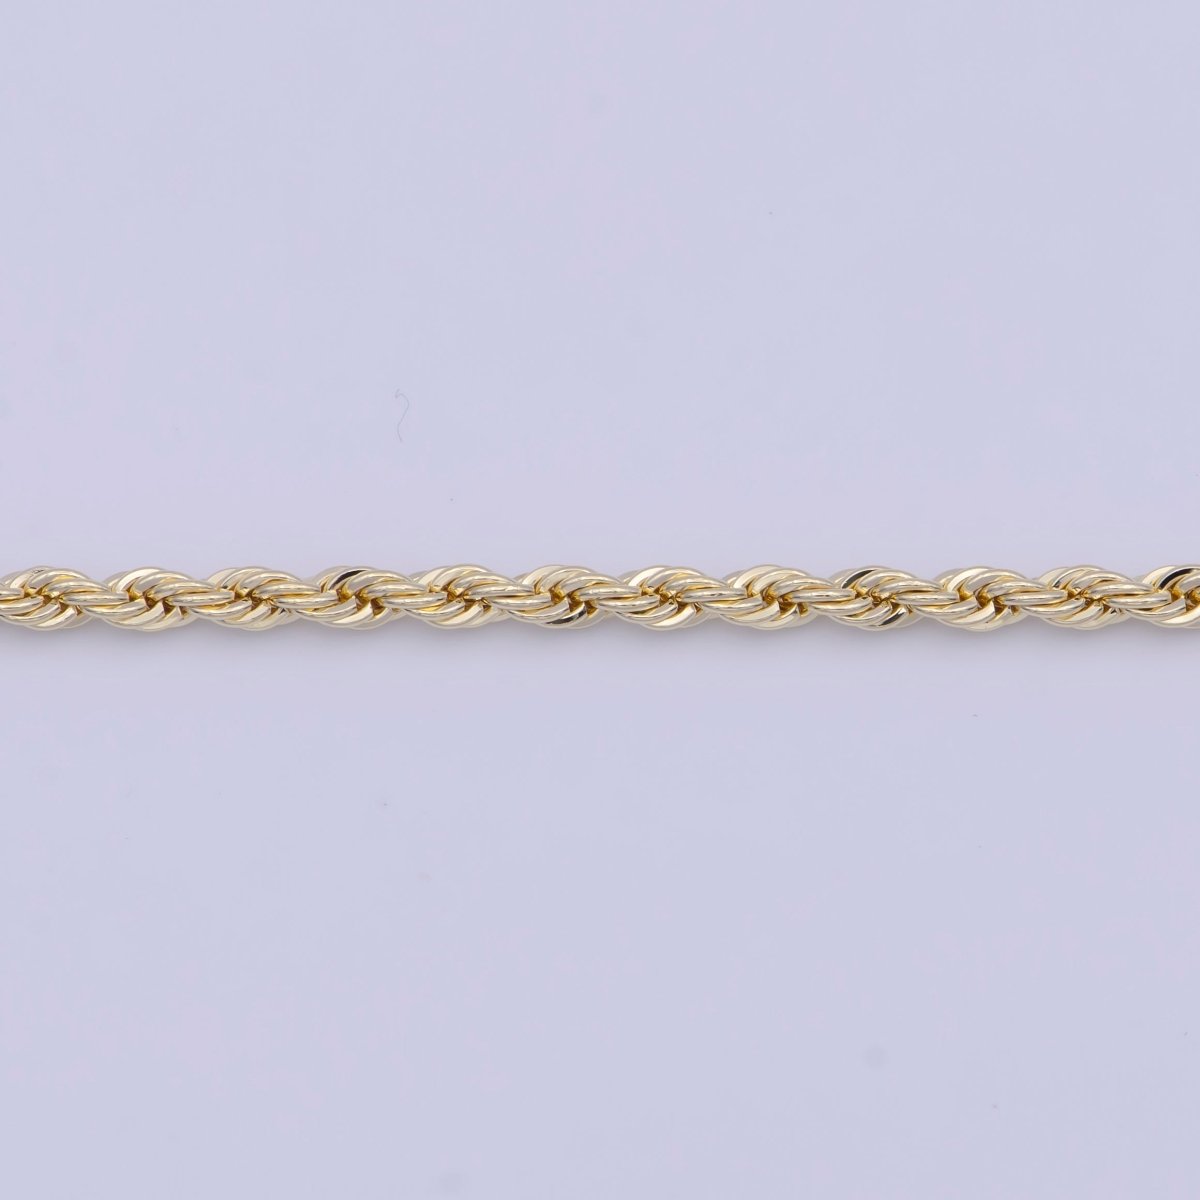 OS Dainty Gold Rope Chain Necklace 17.5 inch for Woman Jewelry Making Supply | WA-1114 Clearance Pricing - DLUXCA